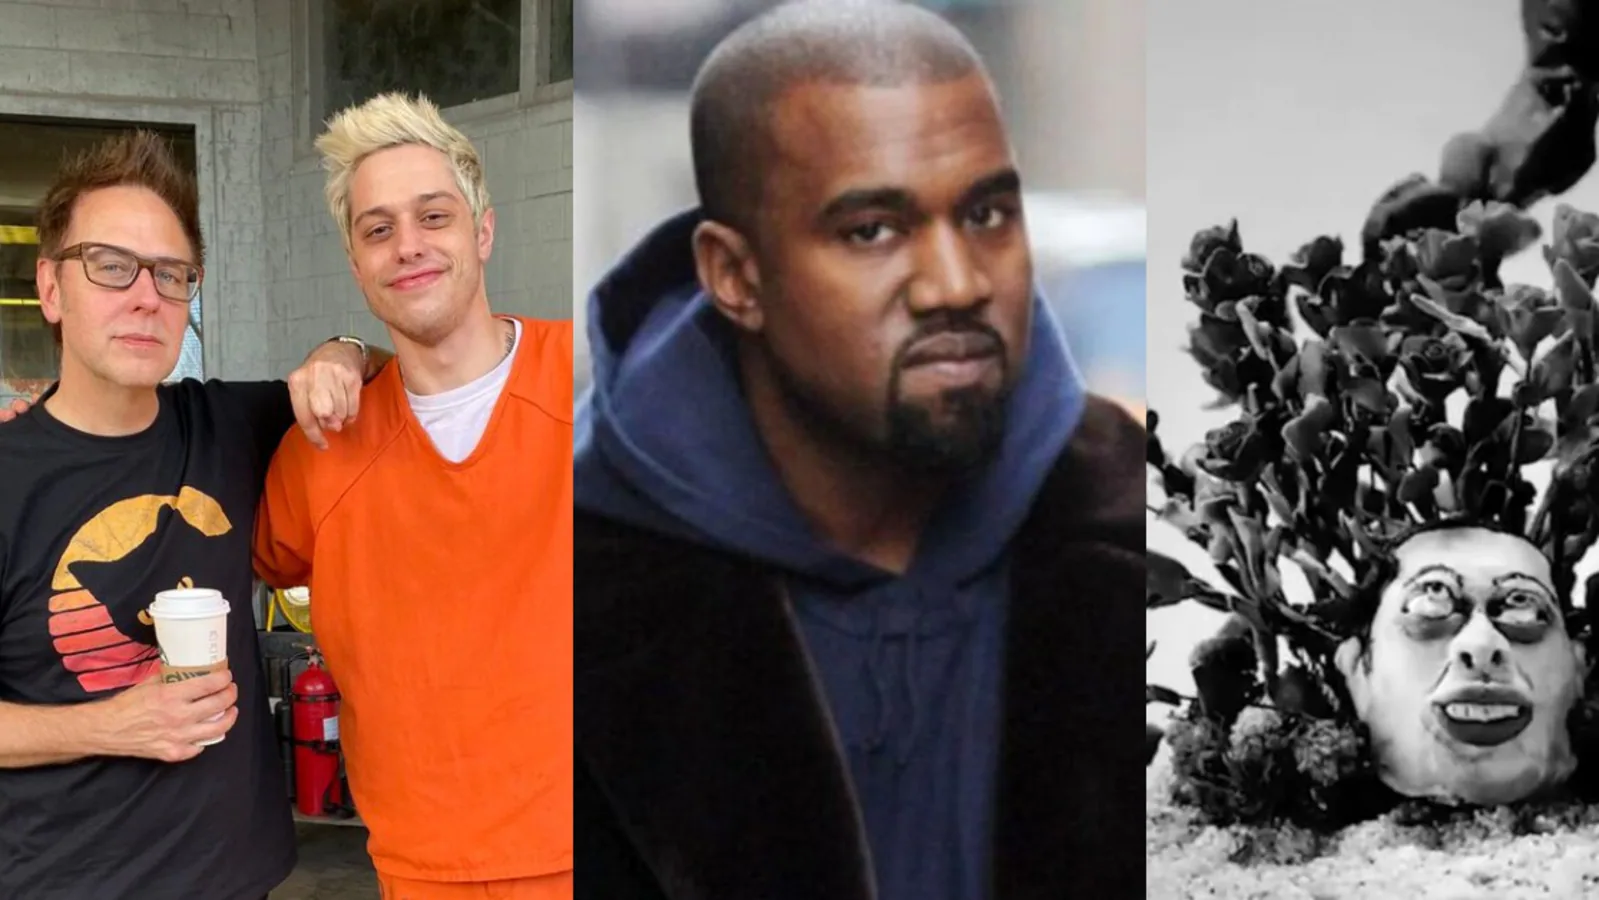 James Gunn defends Pete Davidson after Kanye West’s video shows him being ‘buried’, Kim Kardashian likes his sweet